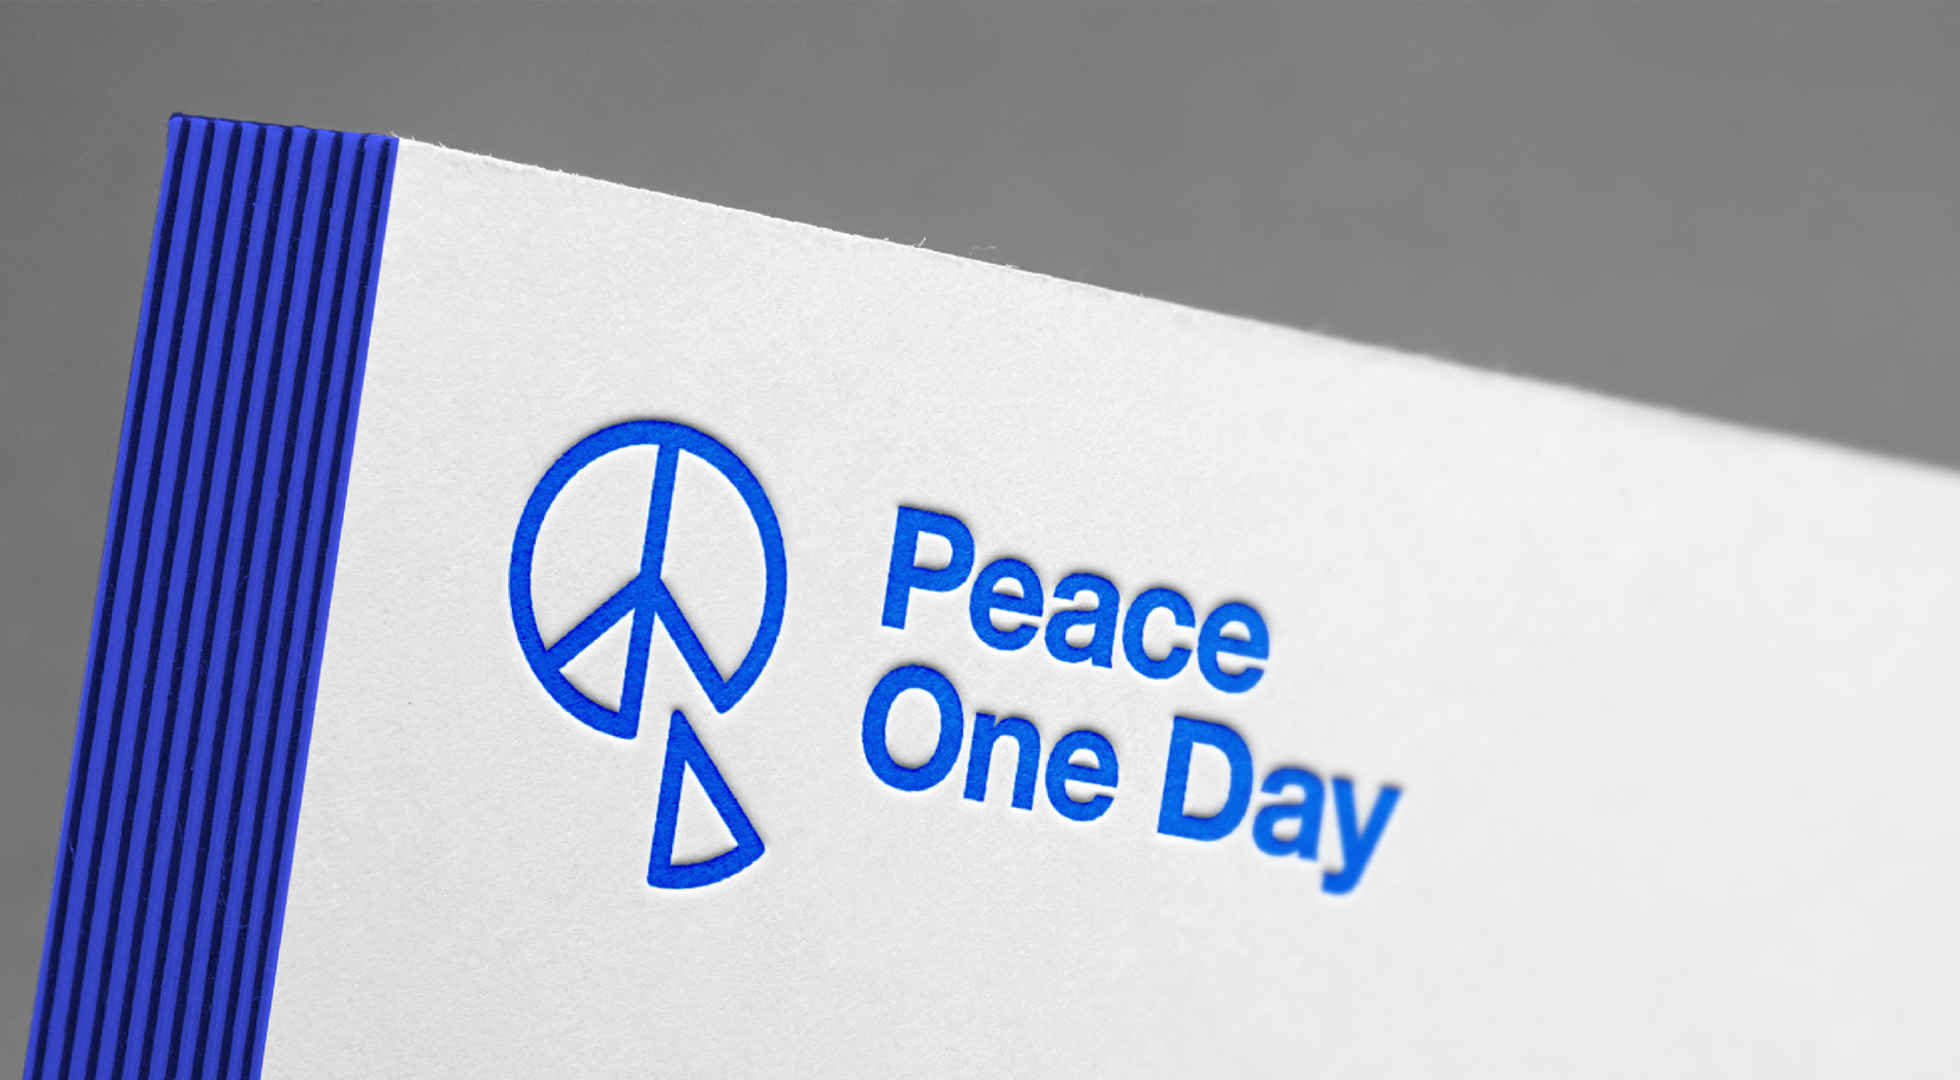 Peace One Day logo on notebook 